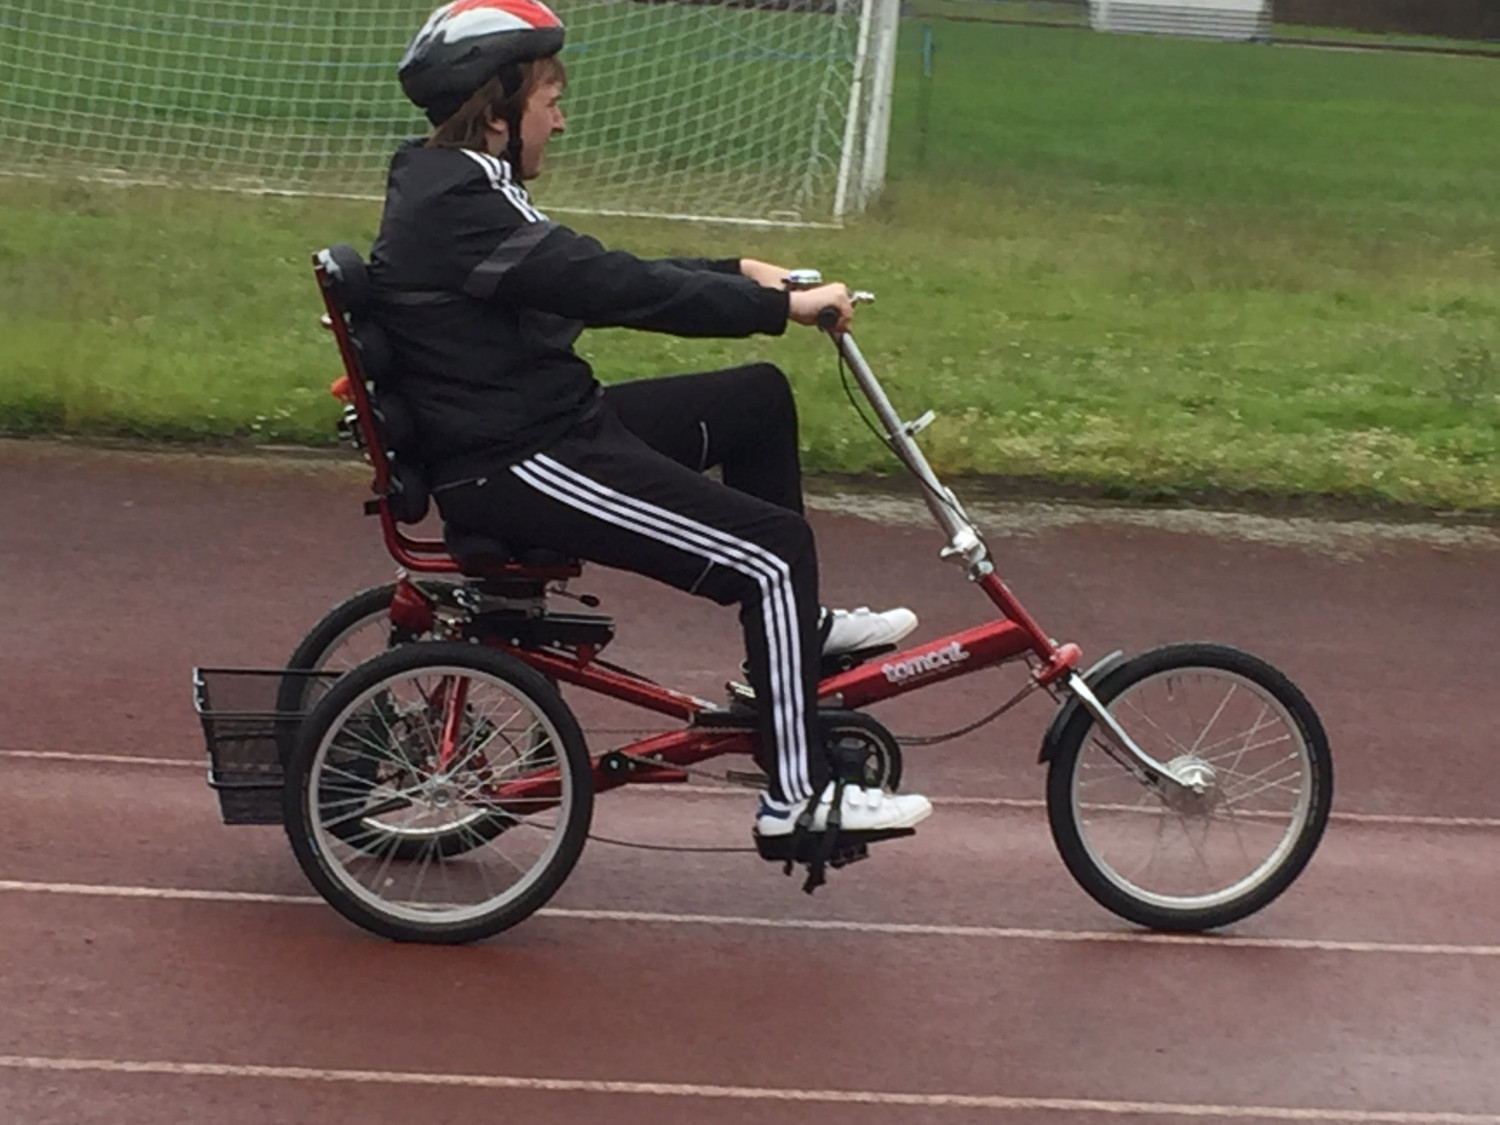 Solo adapted cycle rider